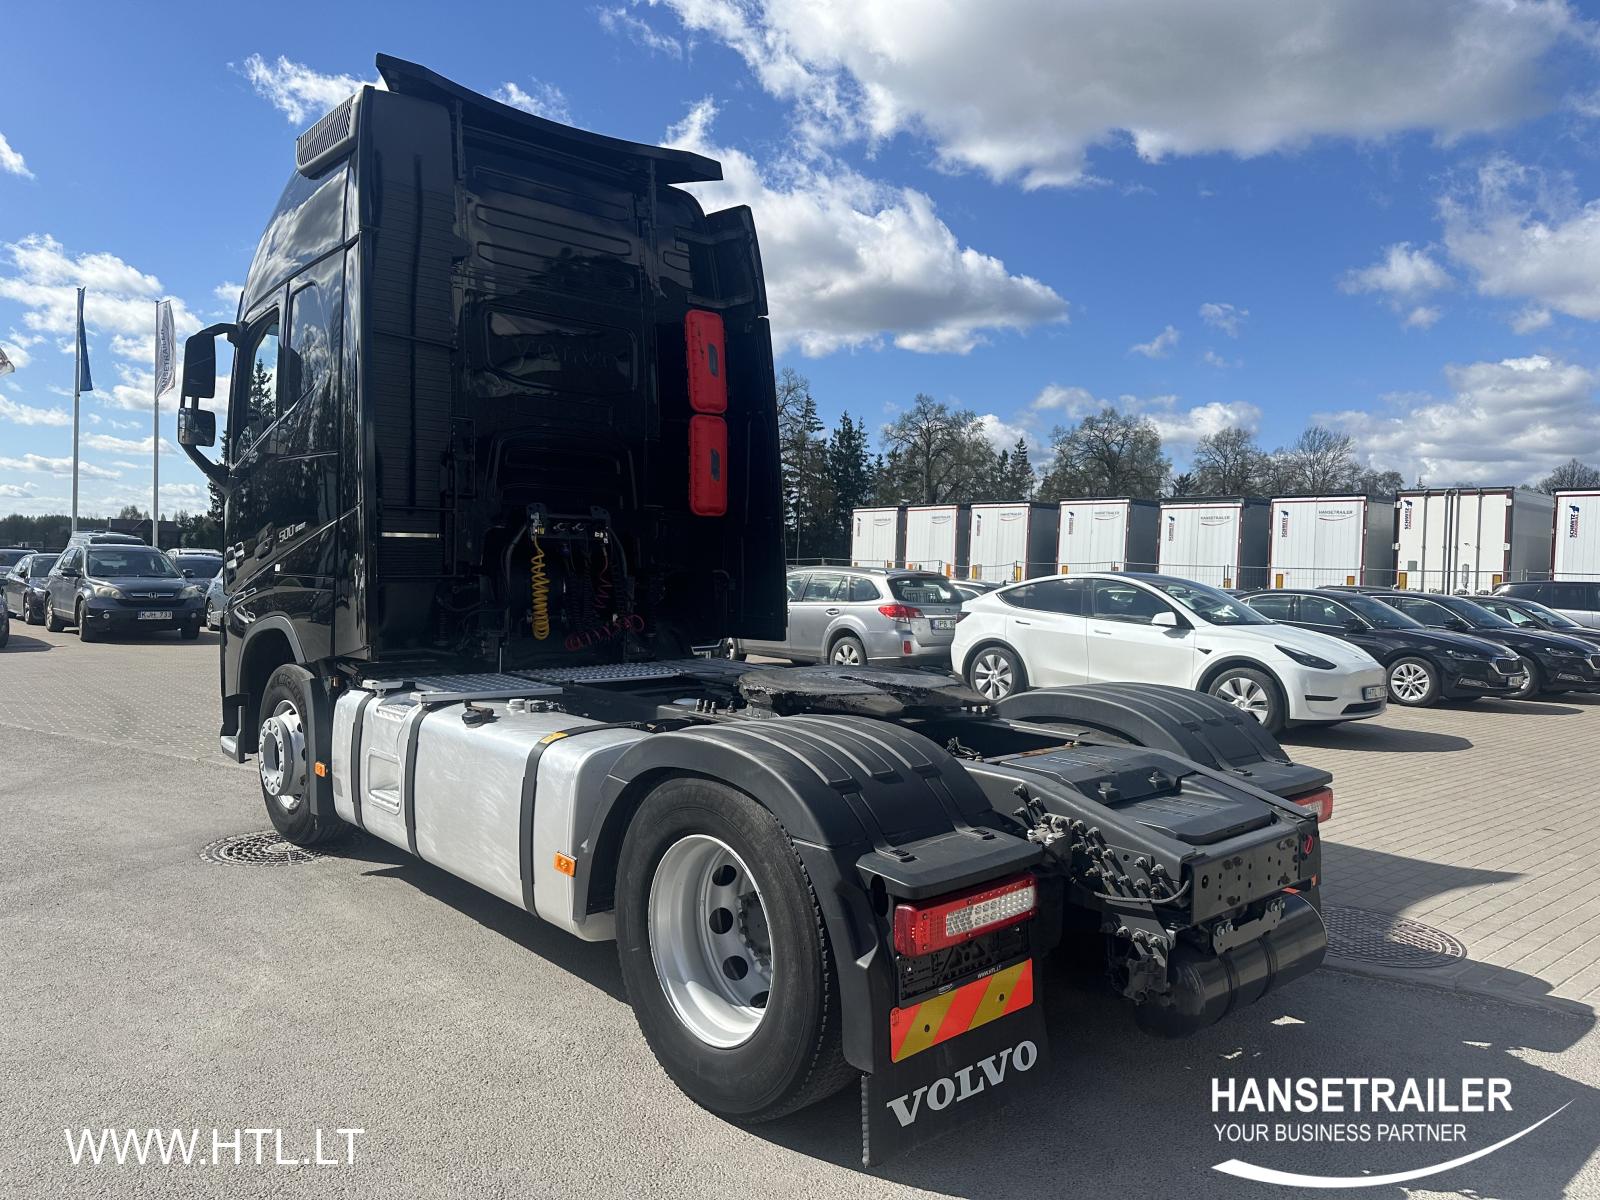 2018 vehículo tractor 4x2 Volvo FH Globetrotter XL 500